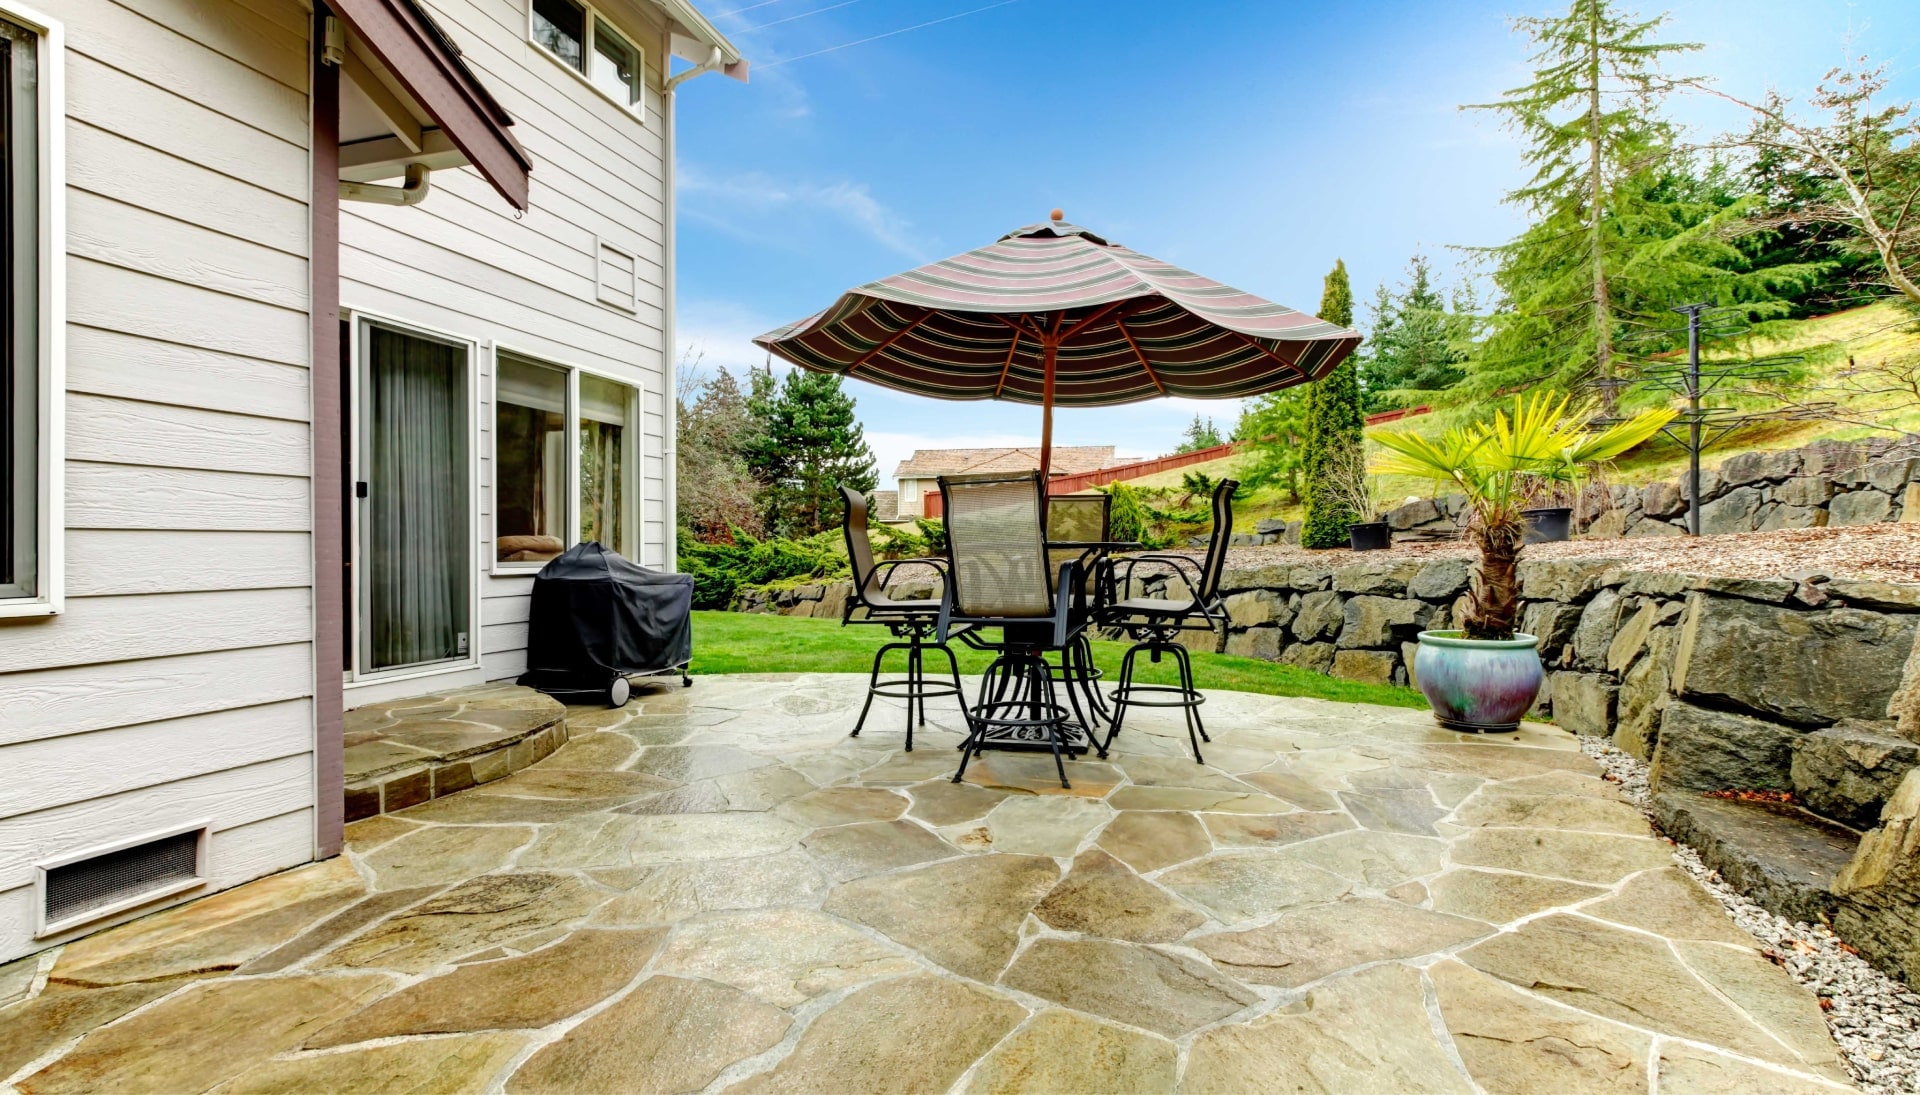 Beautifully Textured and Patterned Concrete Patios in Redding, California area!